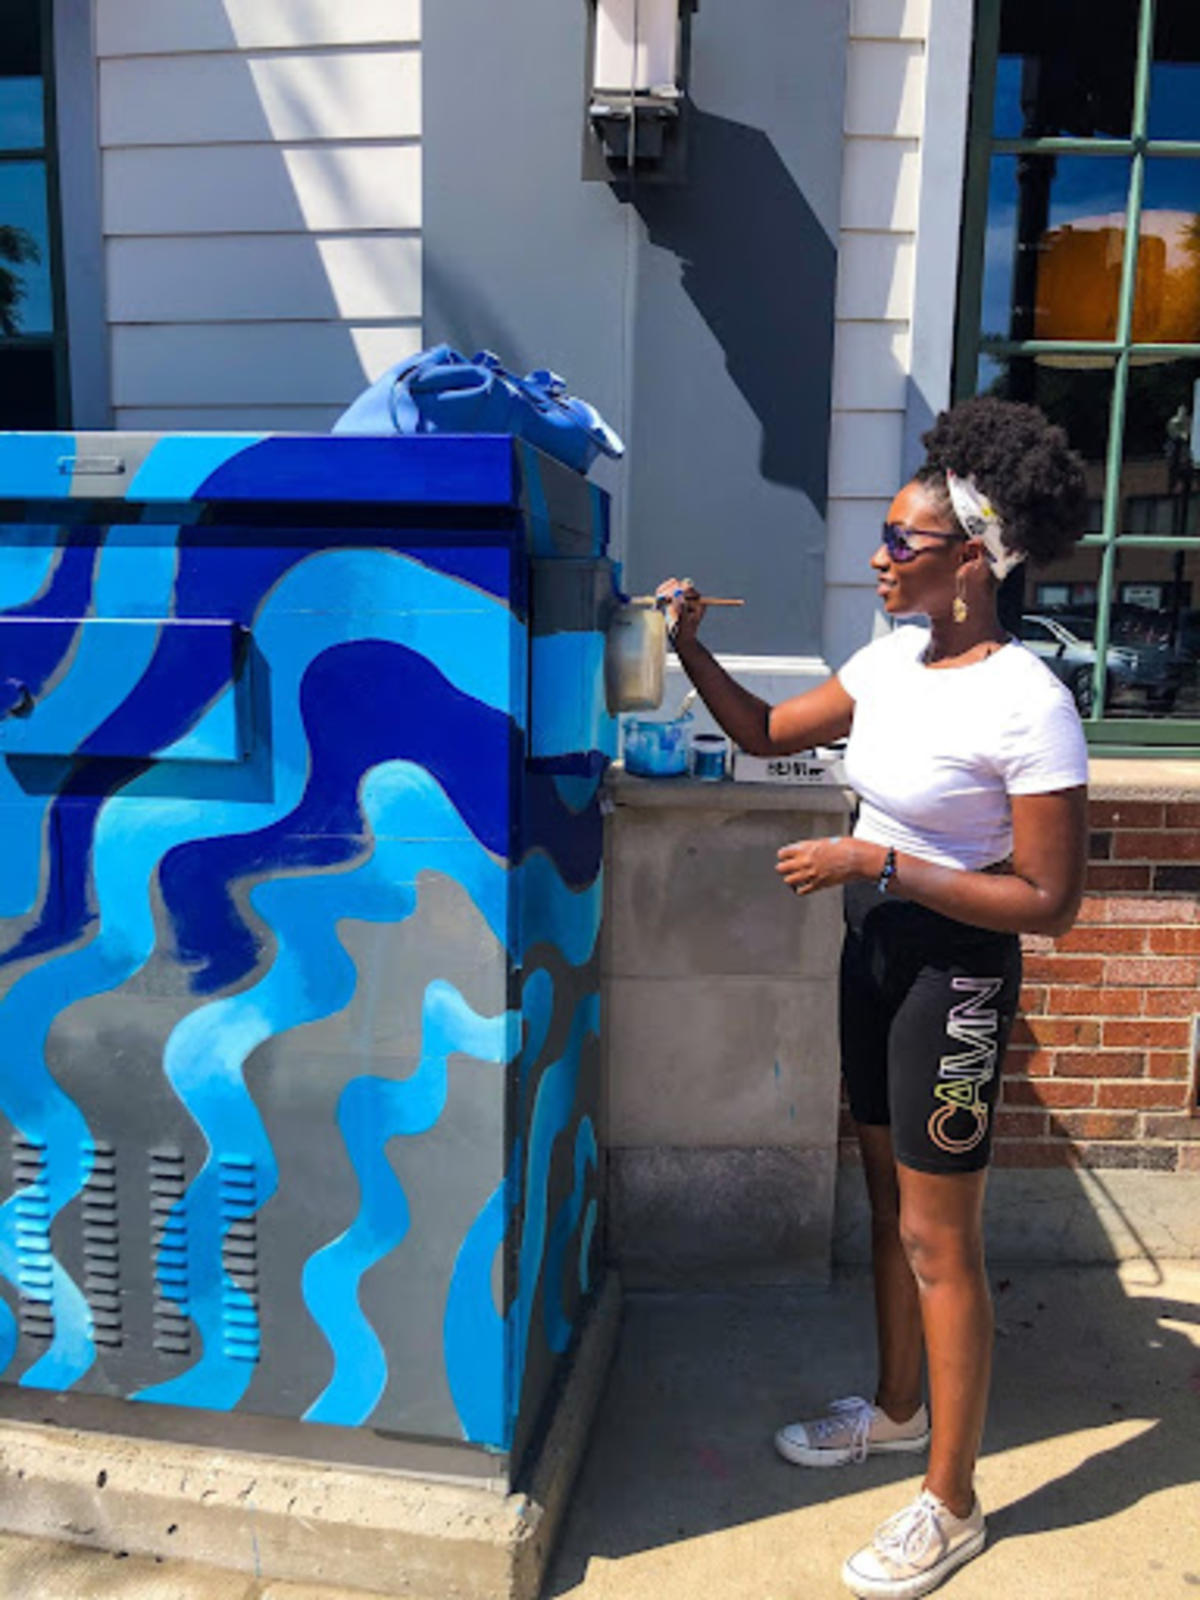 Artist Erica Imosi looking on at her Blue, wave designed PaintBox